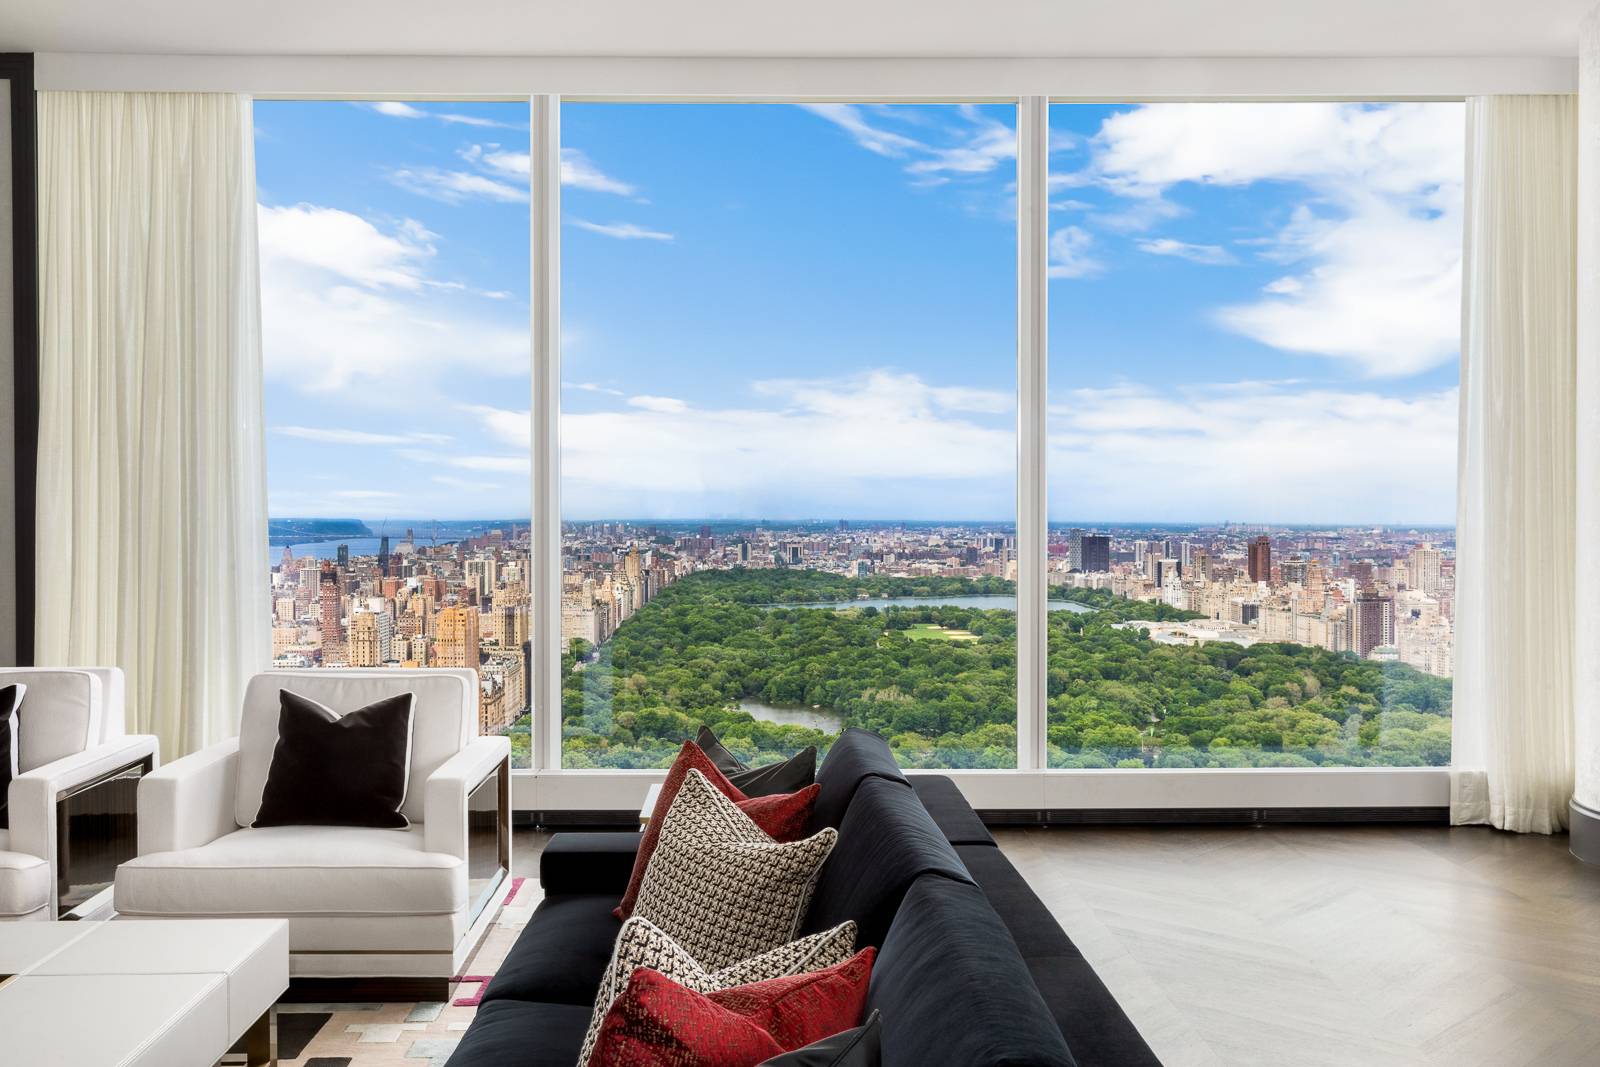 This three bedroom, three and one half bathroom residence at Central Park Tower offers gracious living enhanced by quintessential Central Park views from an elevation over 640 feet.